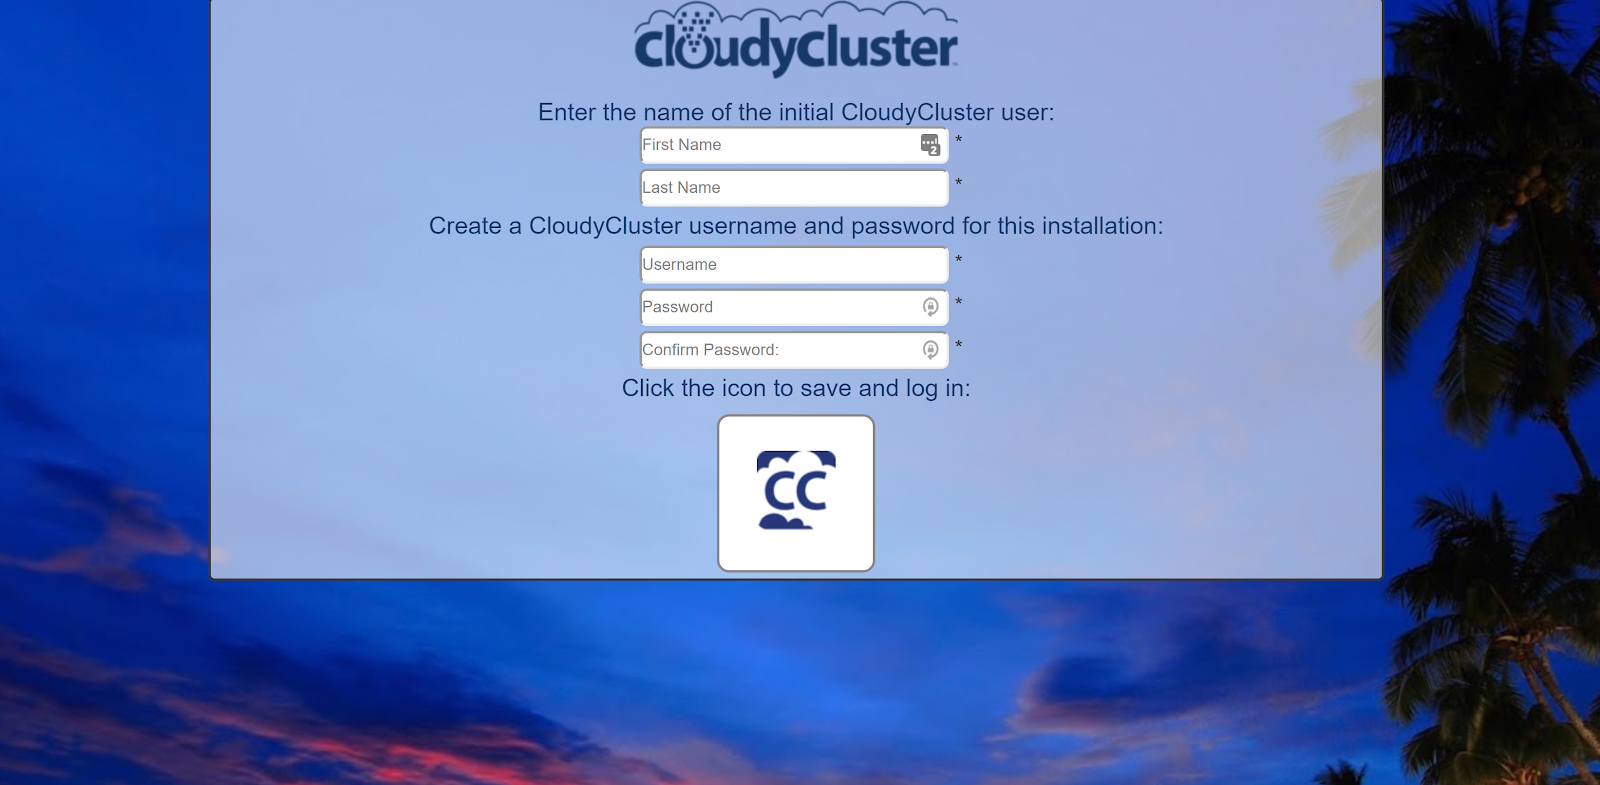 CloudyCluster page displaying username and password fields